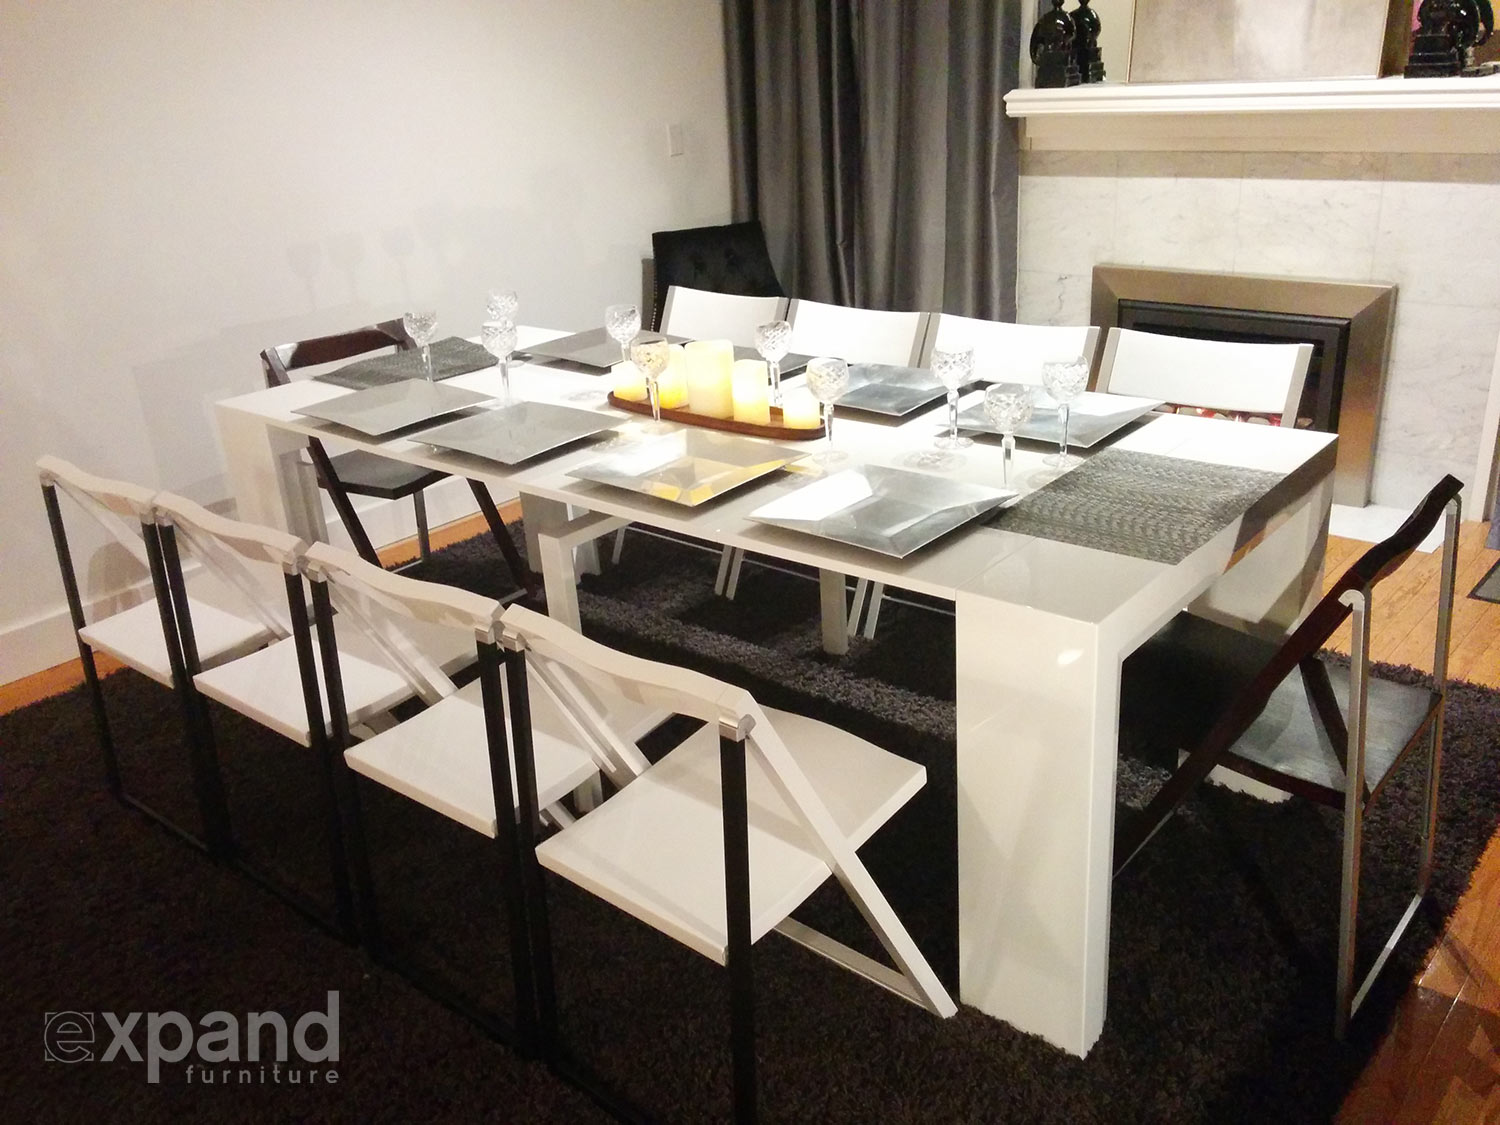 Junior Giant Table Expand Furniture